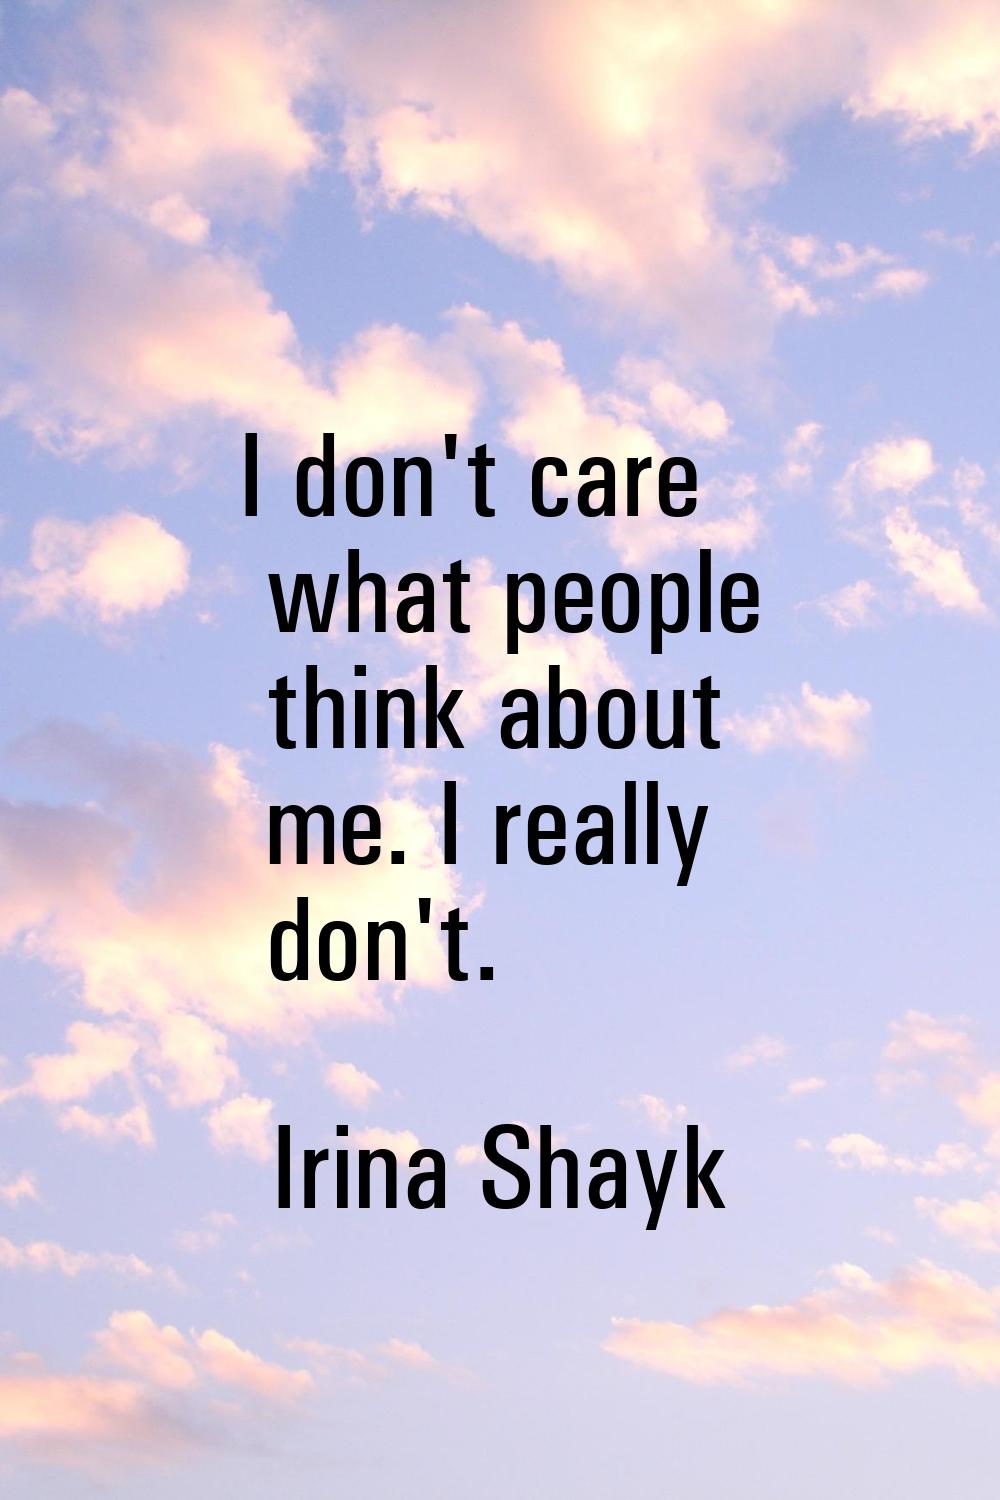 I don't care what people think about me. I really don't.